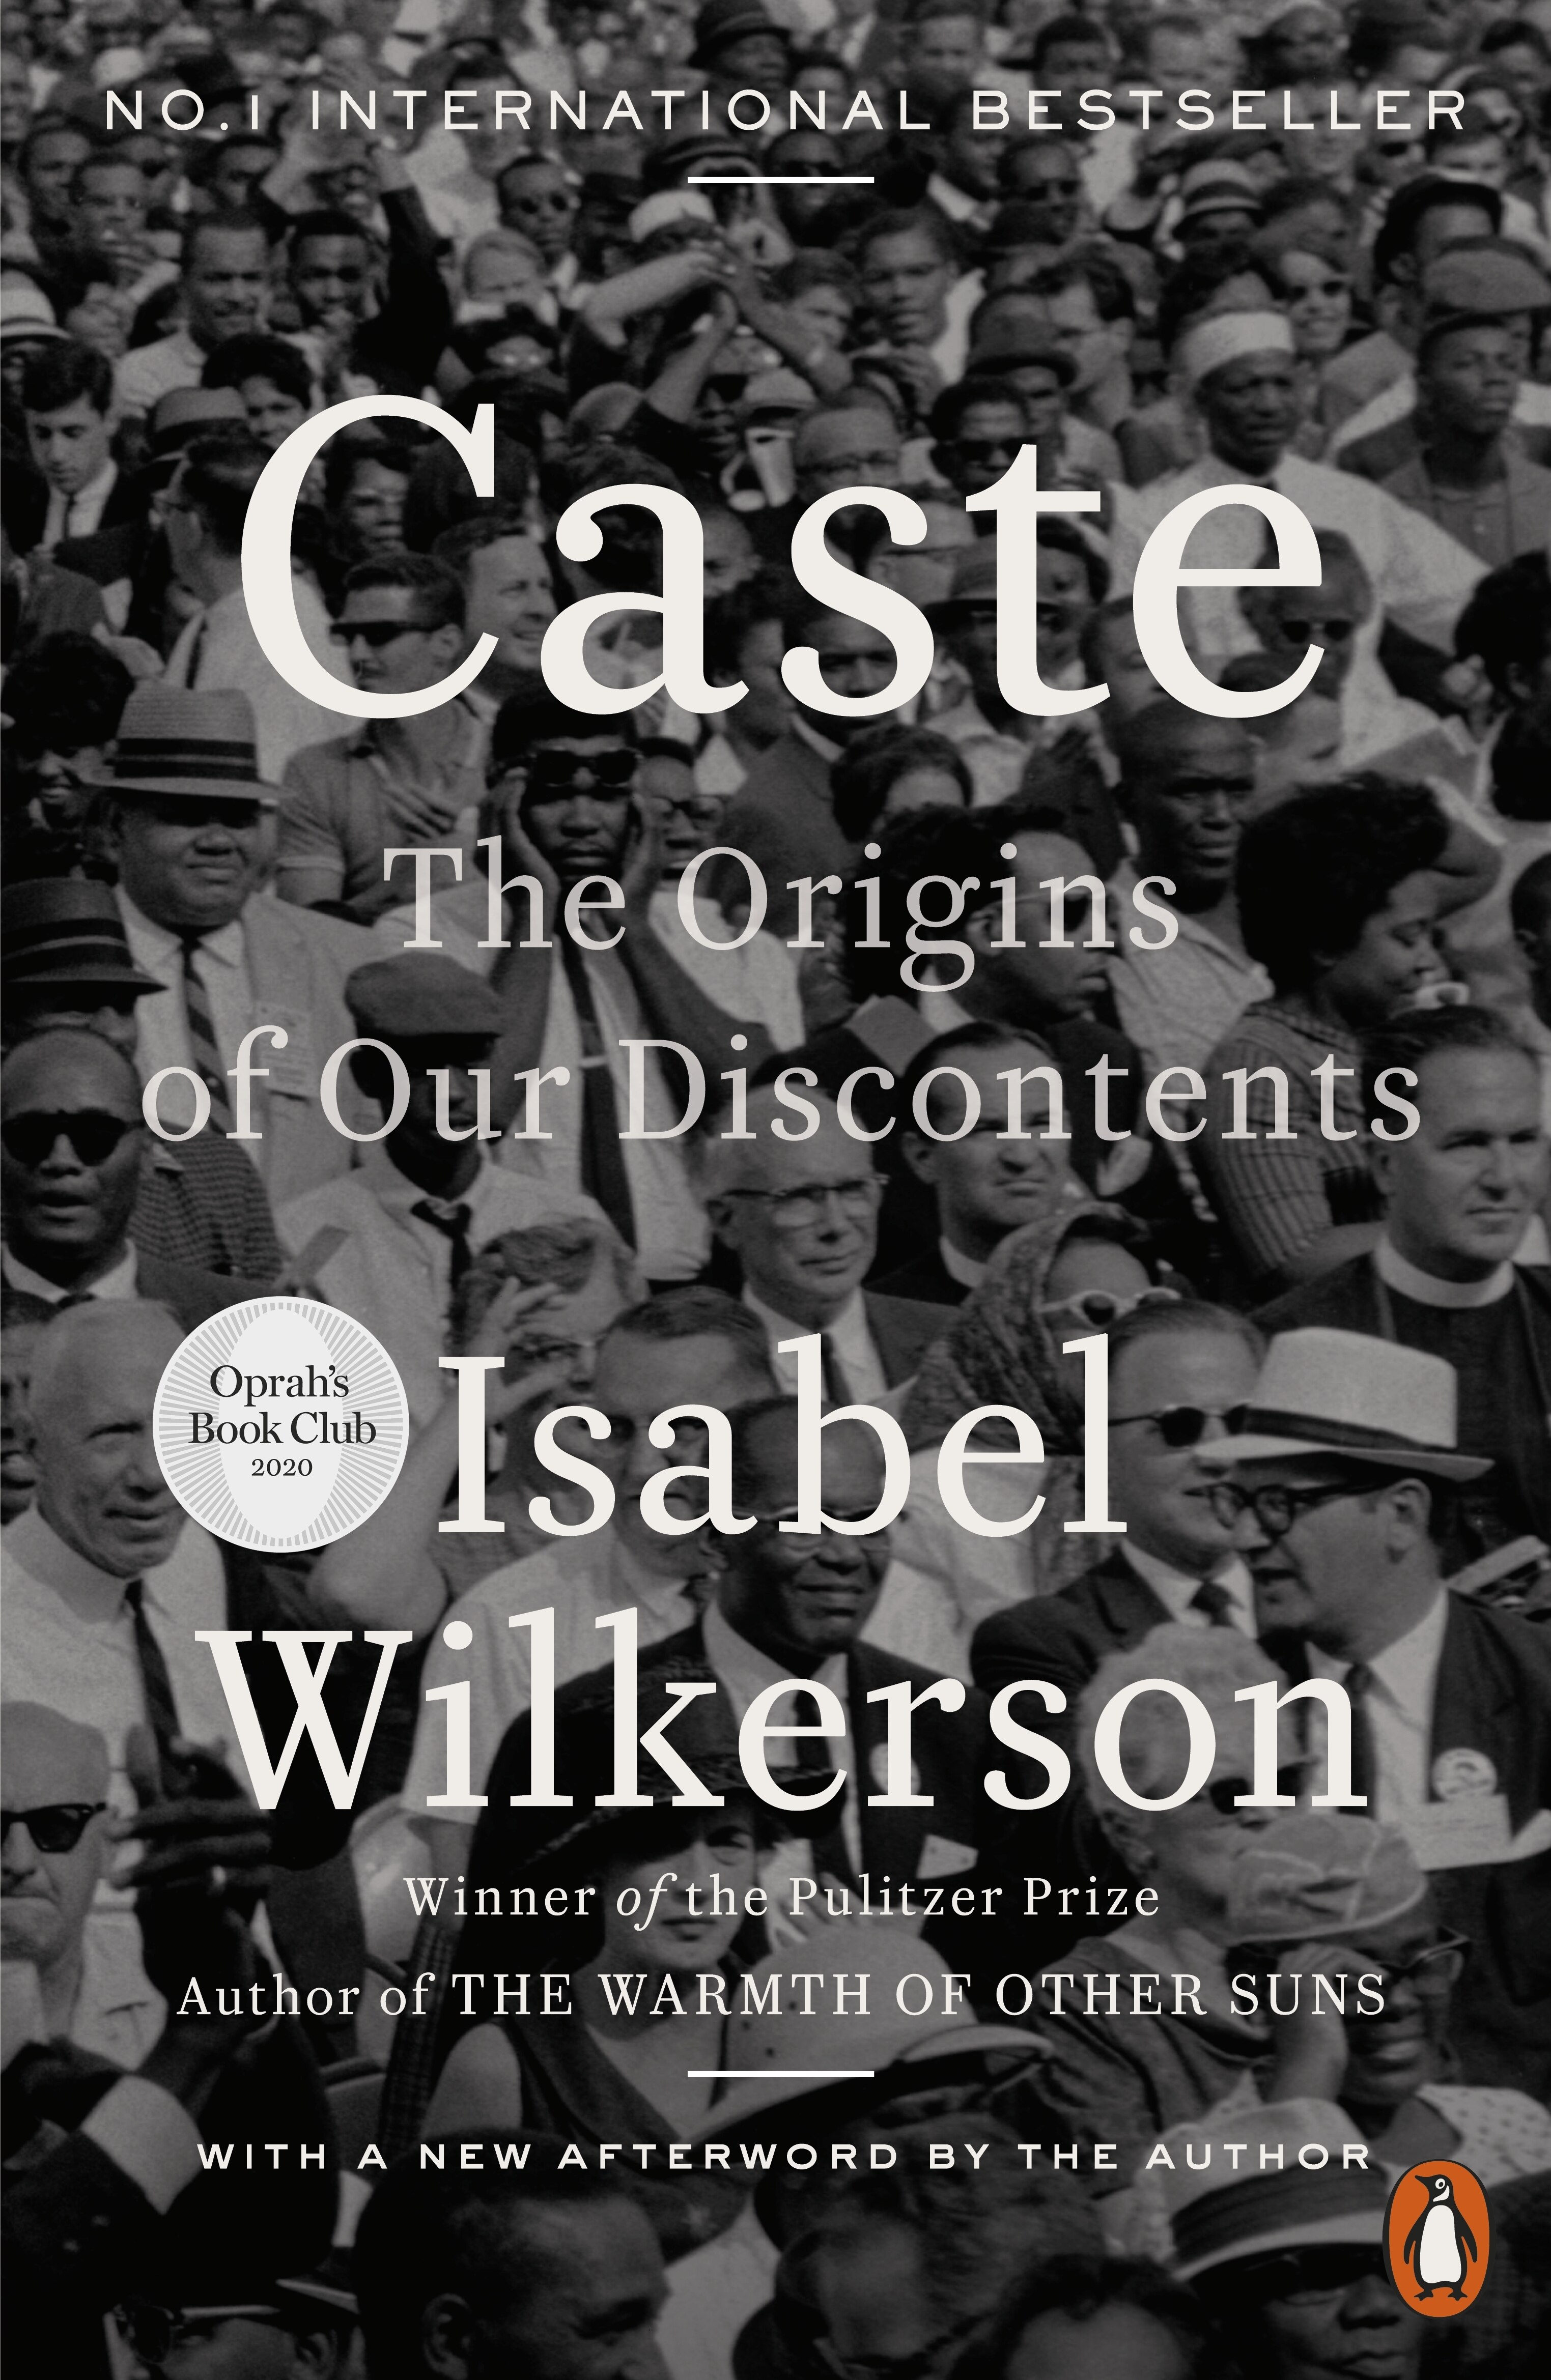 A black and white book cover for Isabel Wilkerson's non-fiction book Caste: The Origins of Our Discontents.